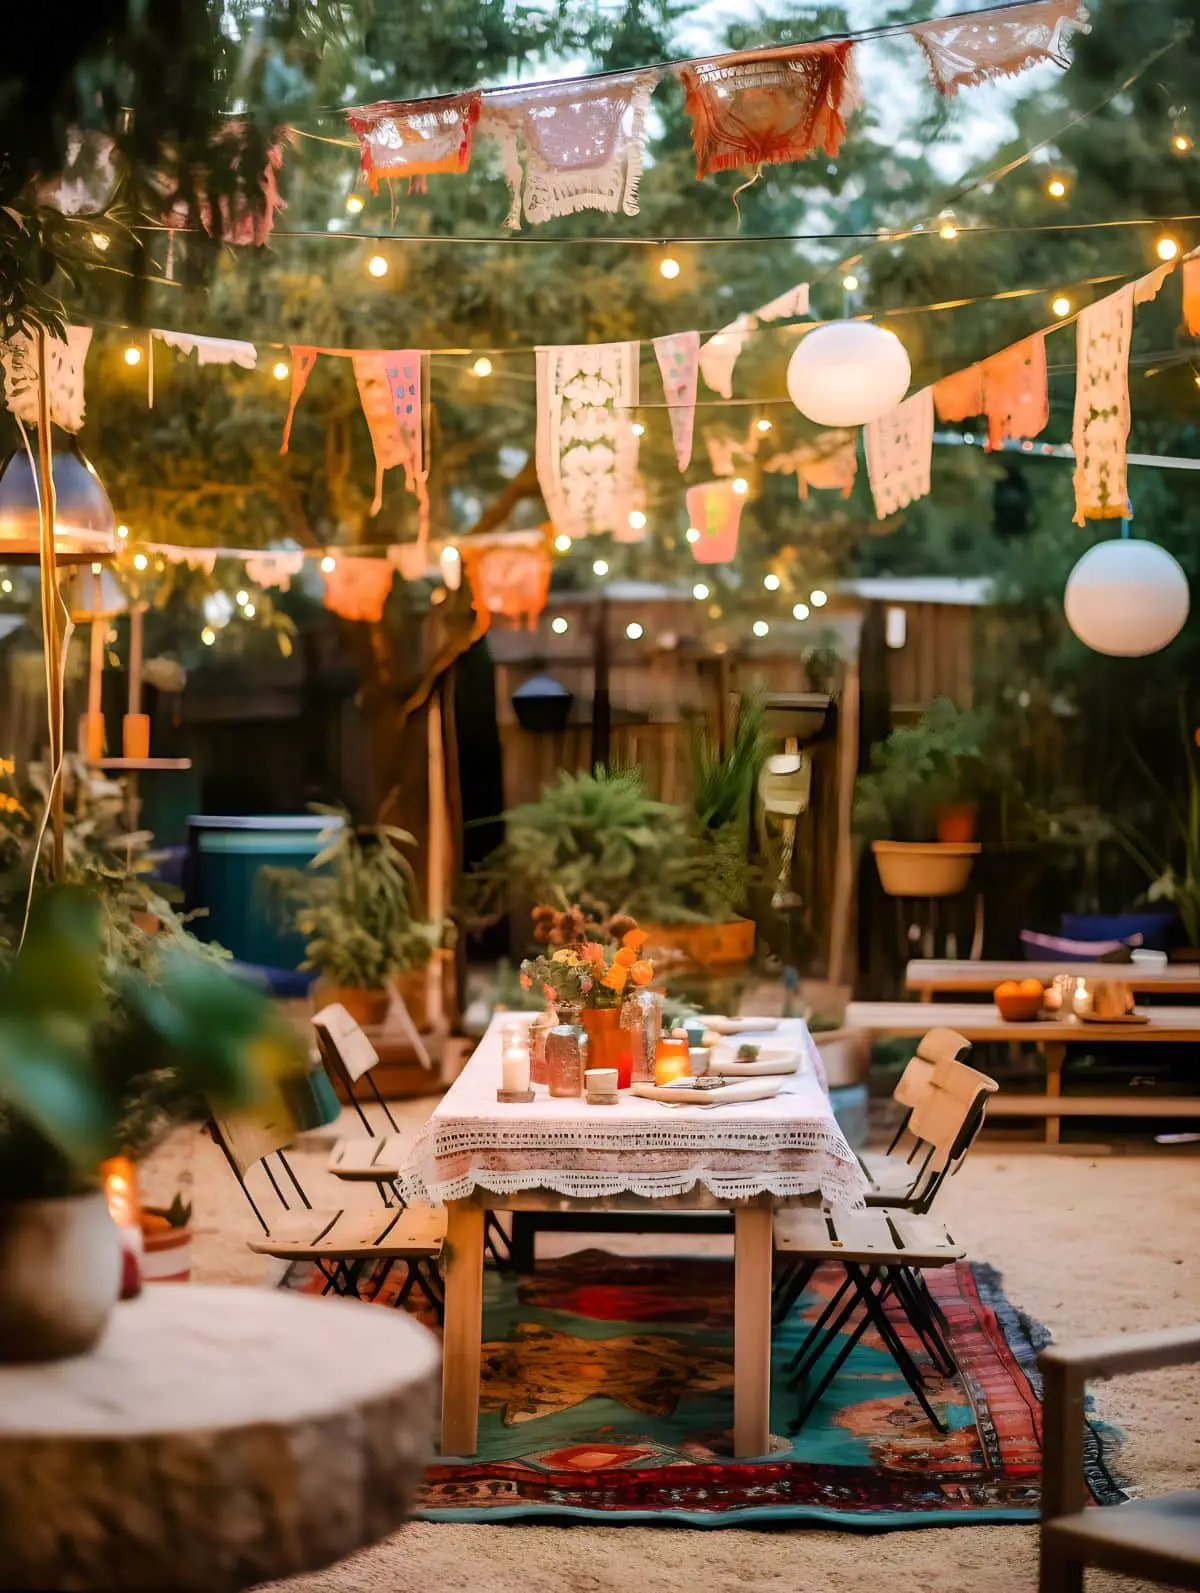 An outdoor space decorated with boho elements, party decorations and hanging lanterns and banners.